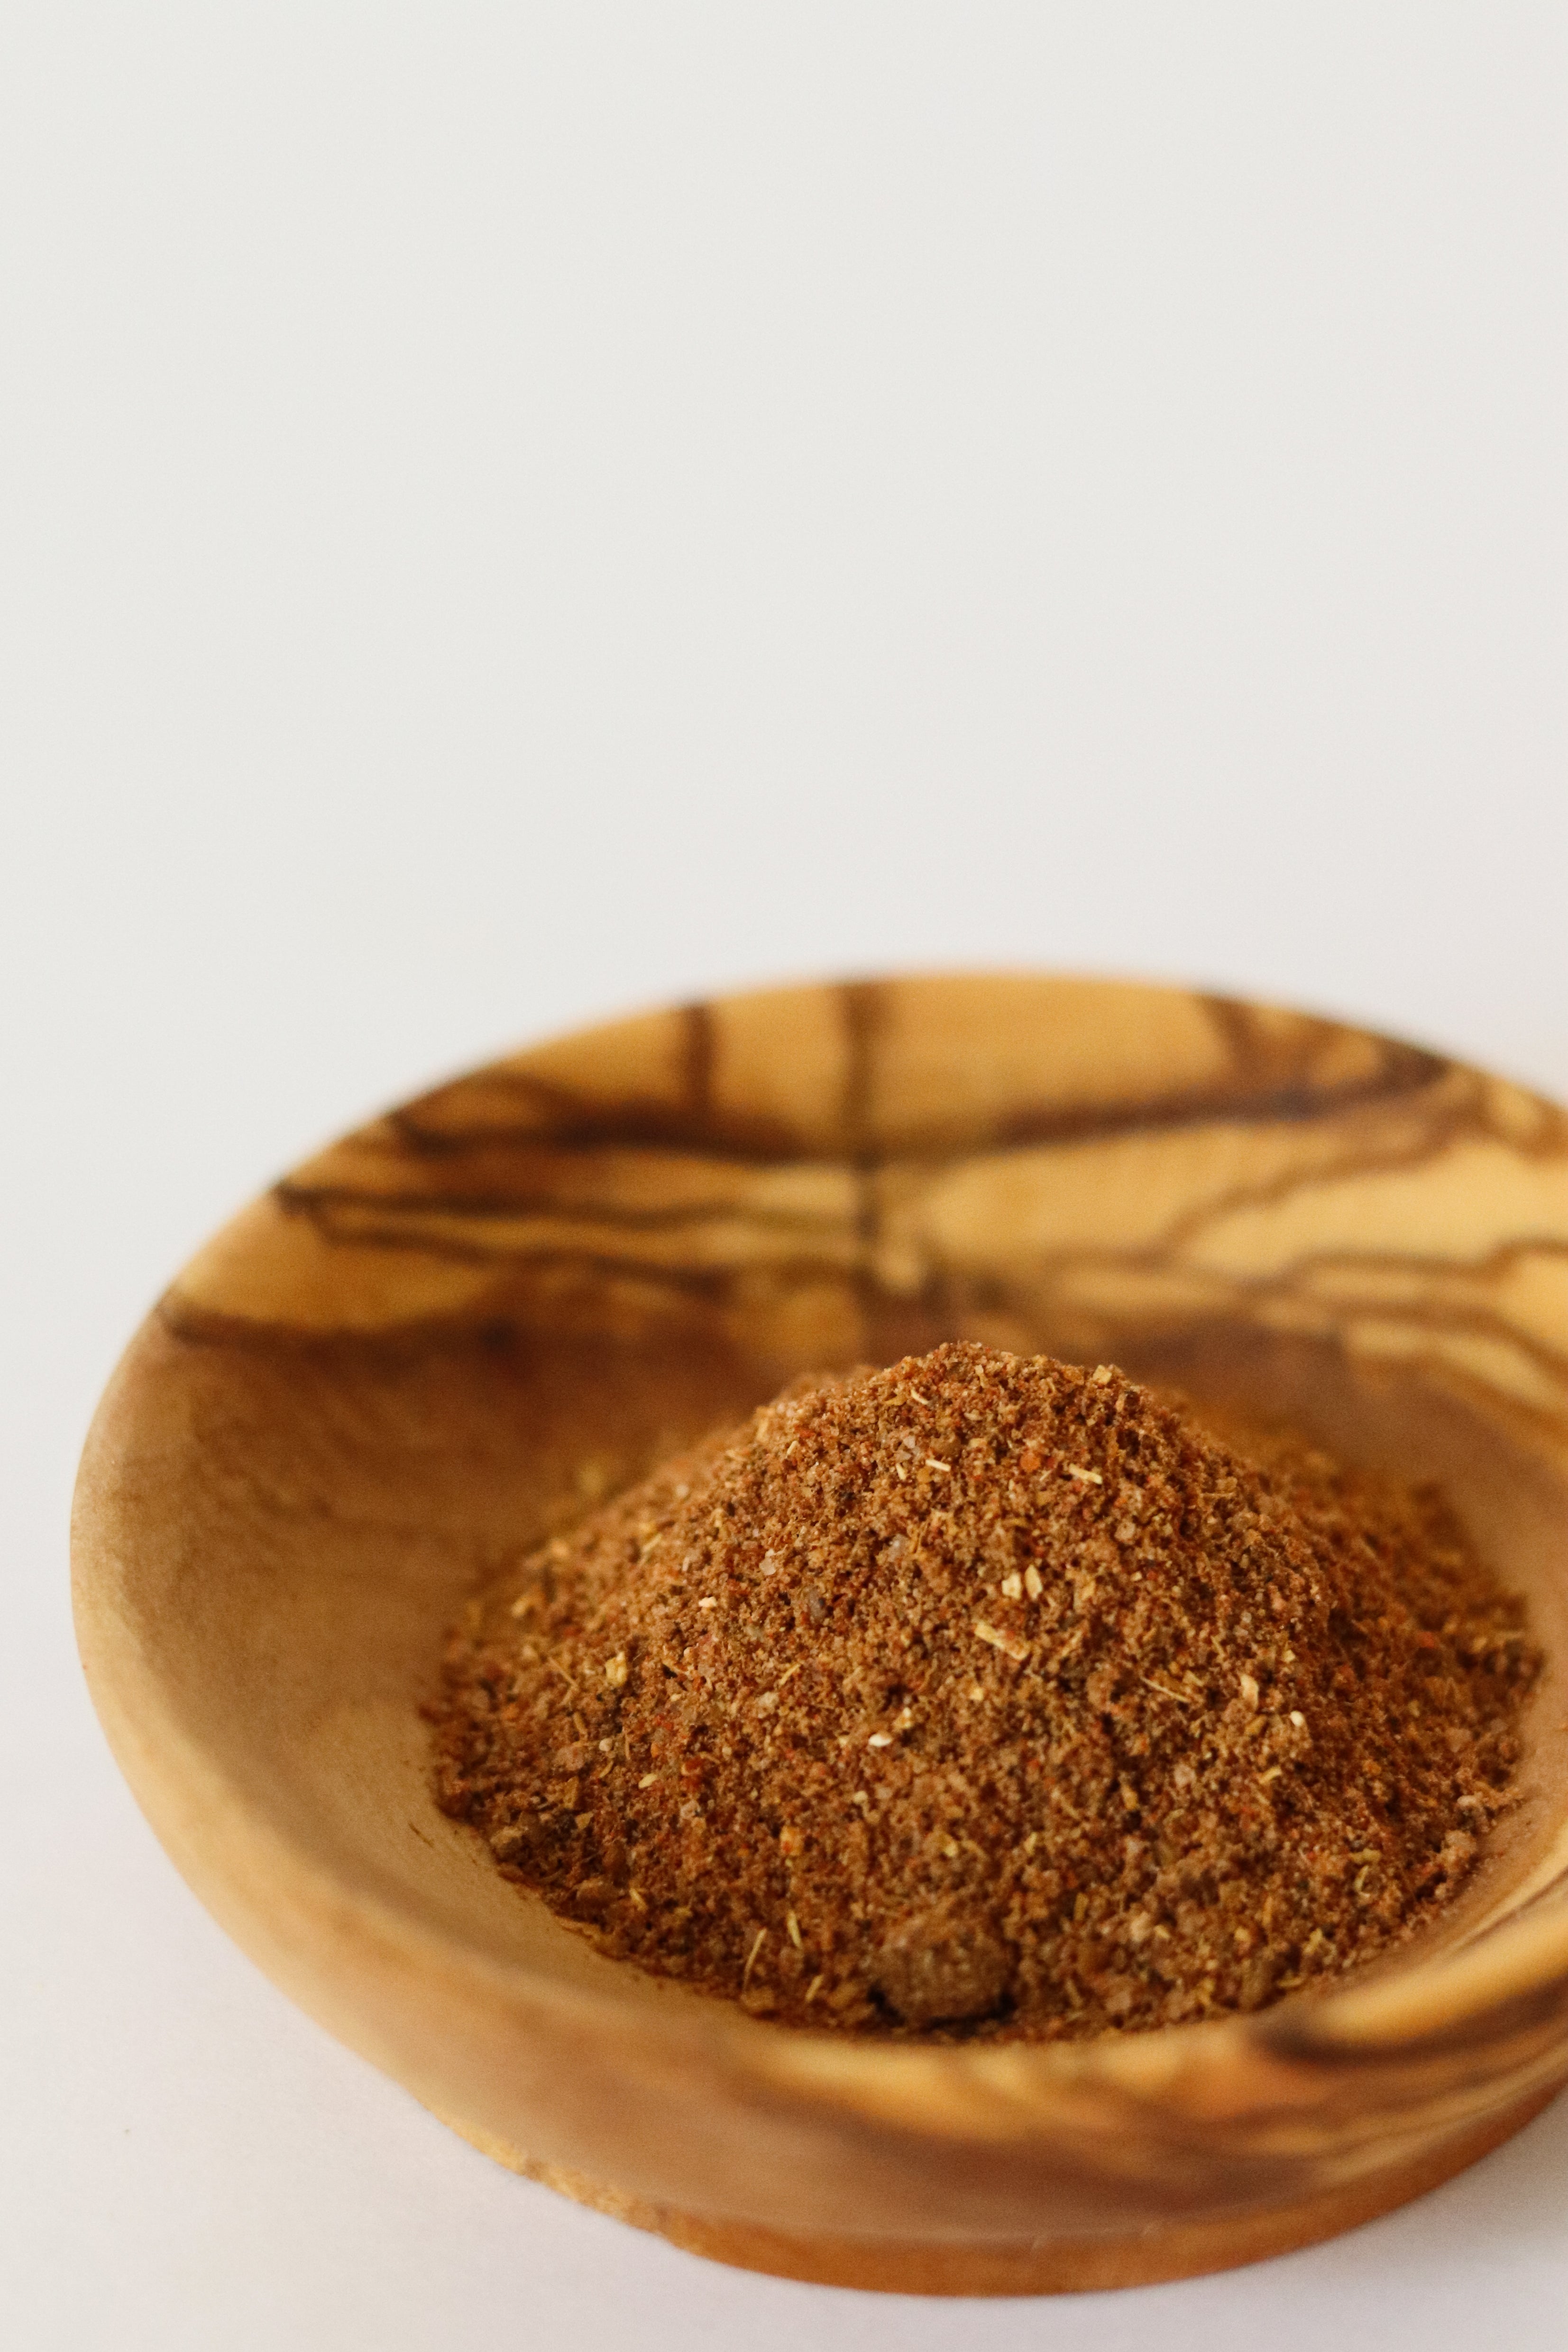 Handmade spice blend can be used with any kind of beans